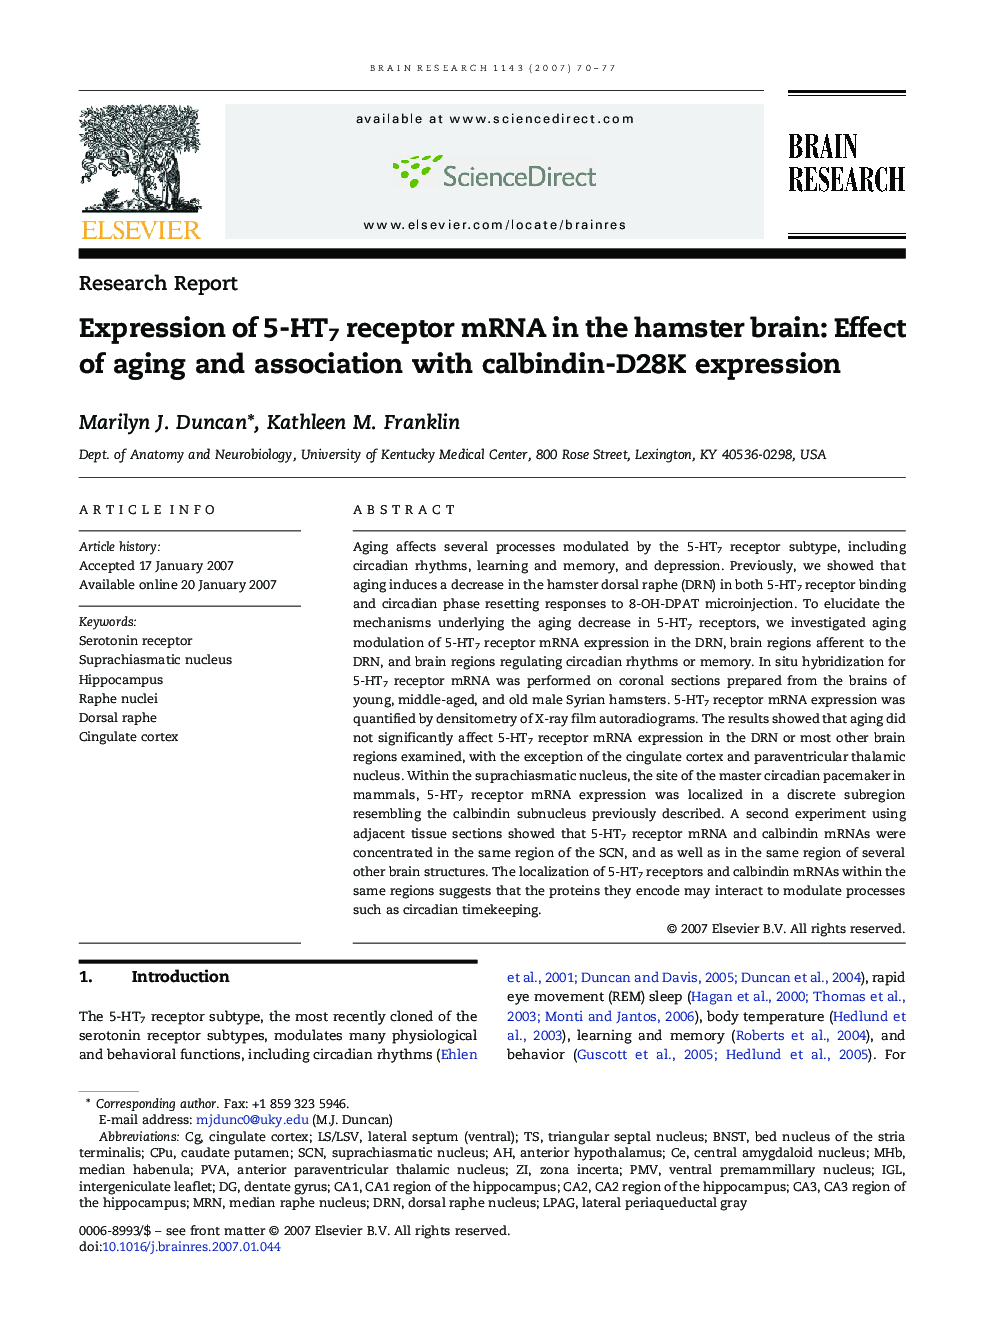 Expression of 5-HT7 receptor mRNA in the hamster brain: Effect of aging and association with calbindin-D28K expression